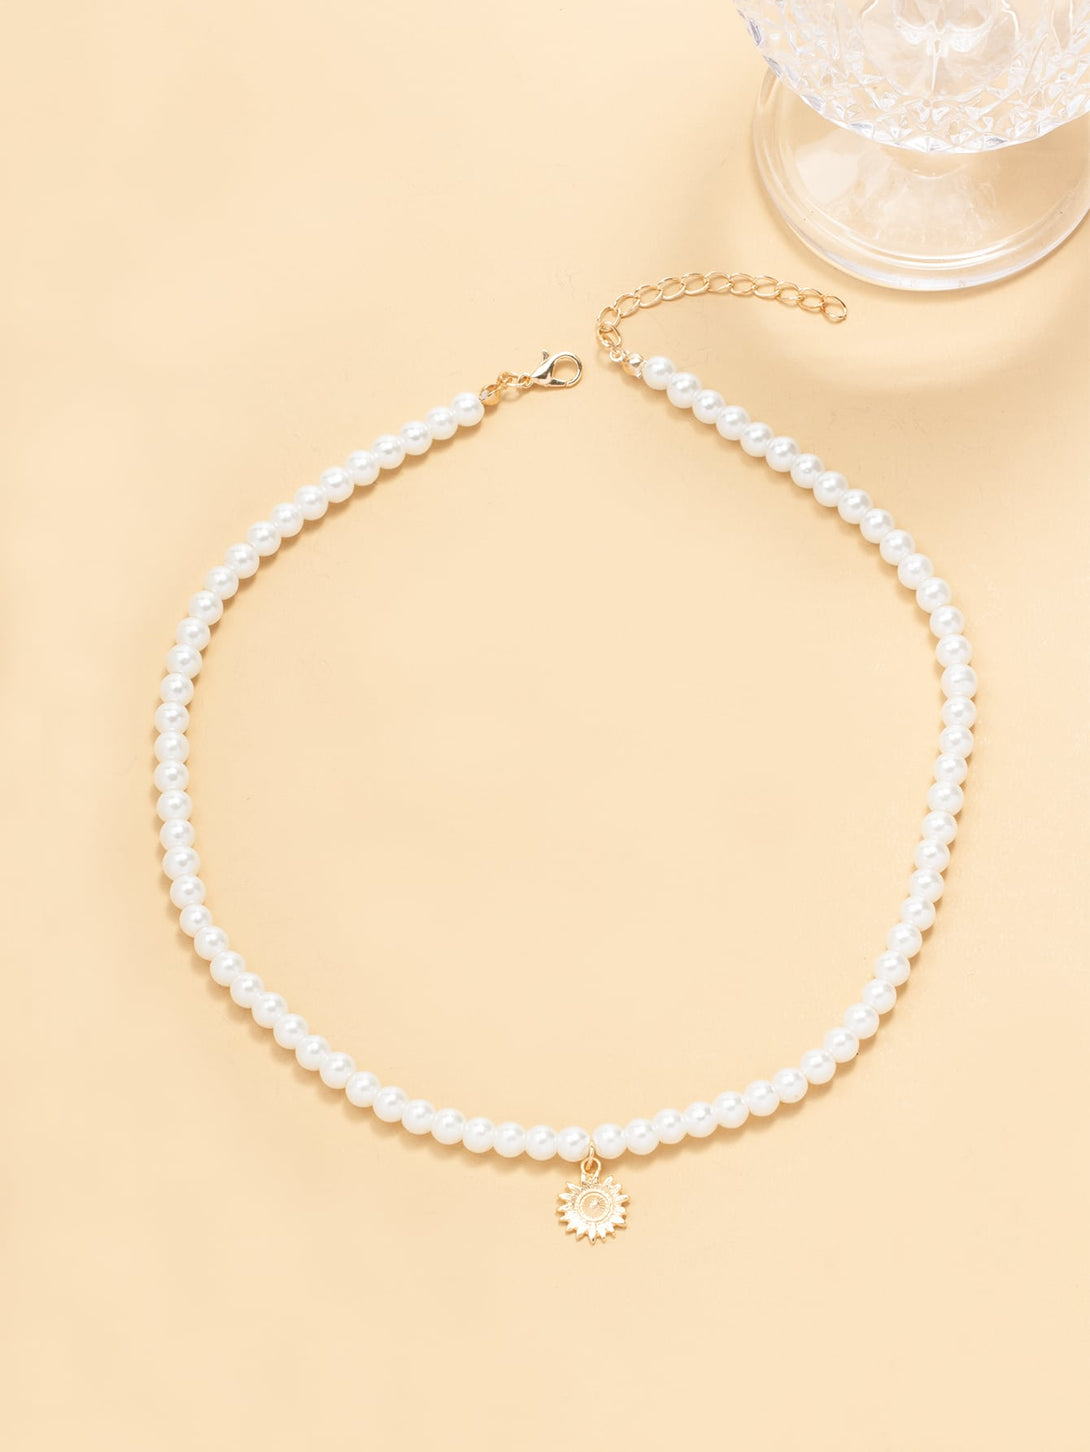 Sun Charm Faux Pearl Beaded Necklace - Negative Apparel